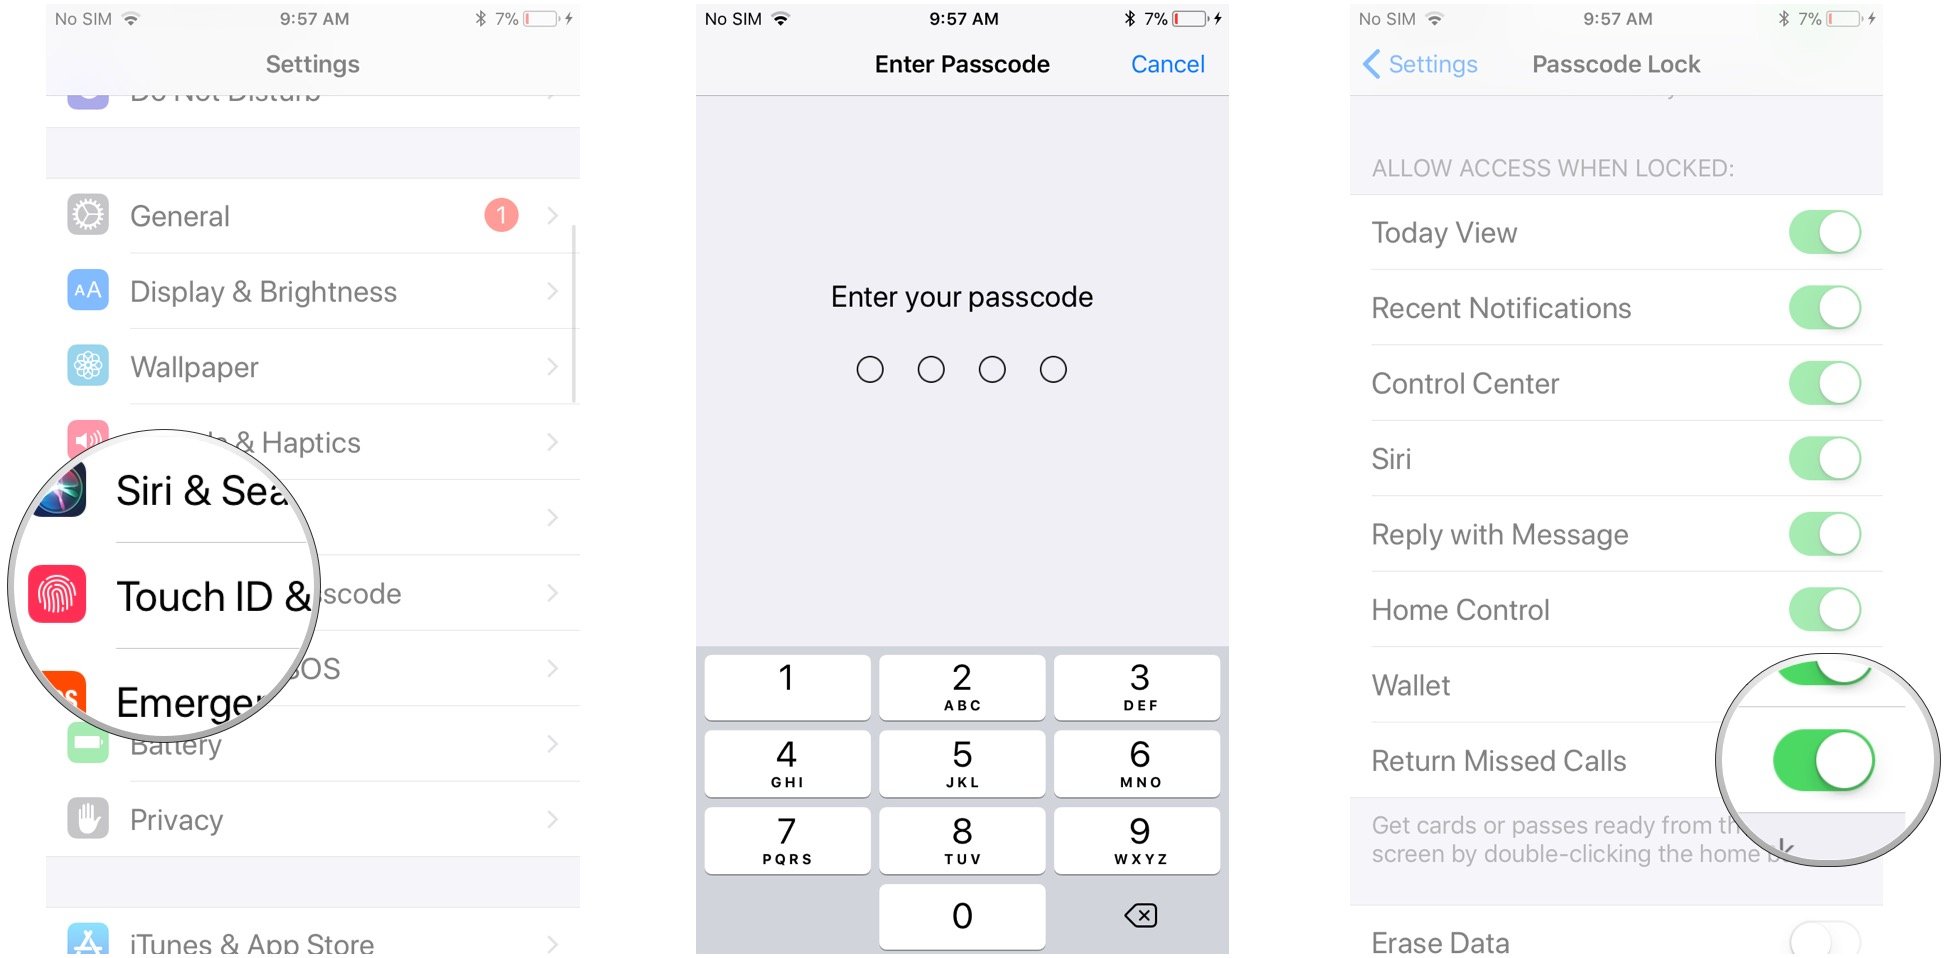 Tap Touch ID & Passcode, enter your passcode, tap the switch next to Return Missed Calls